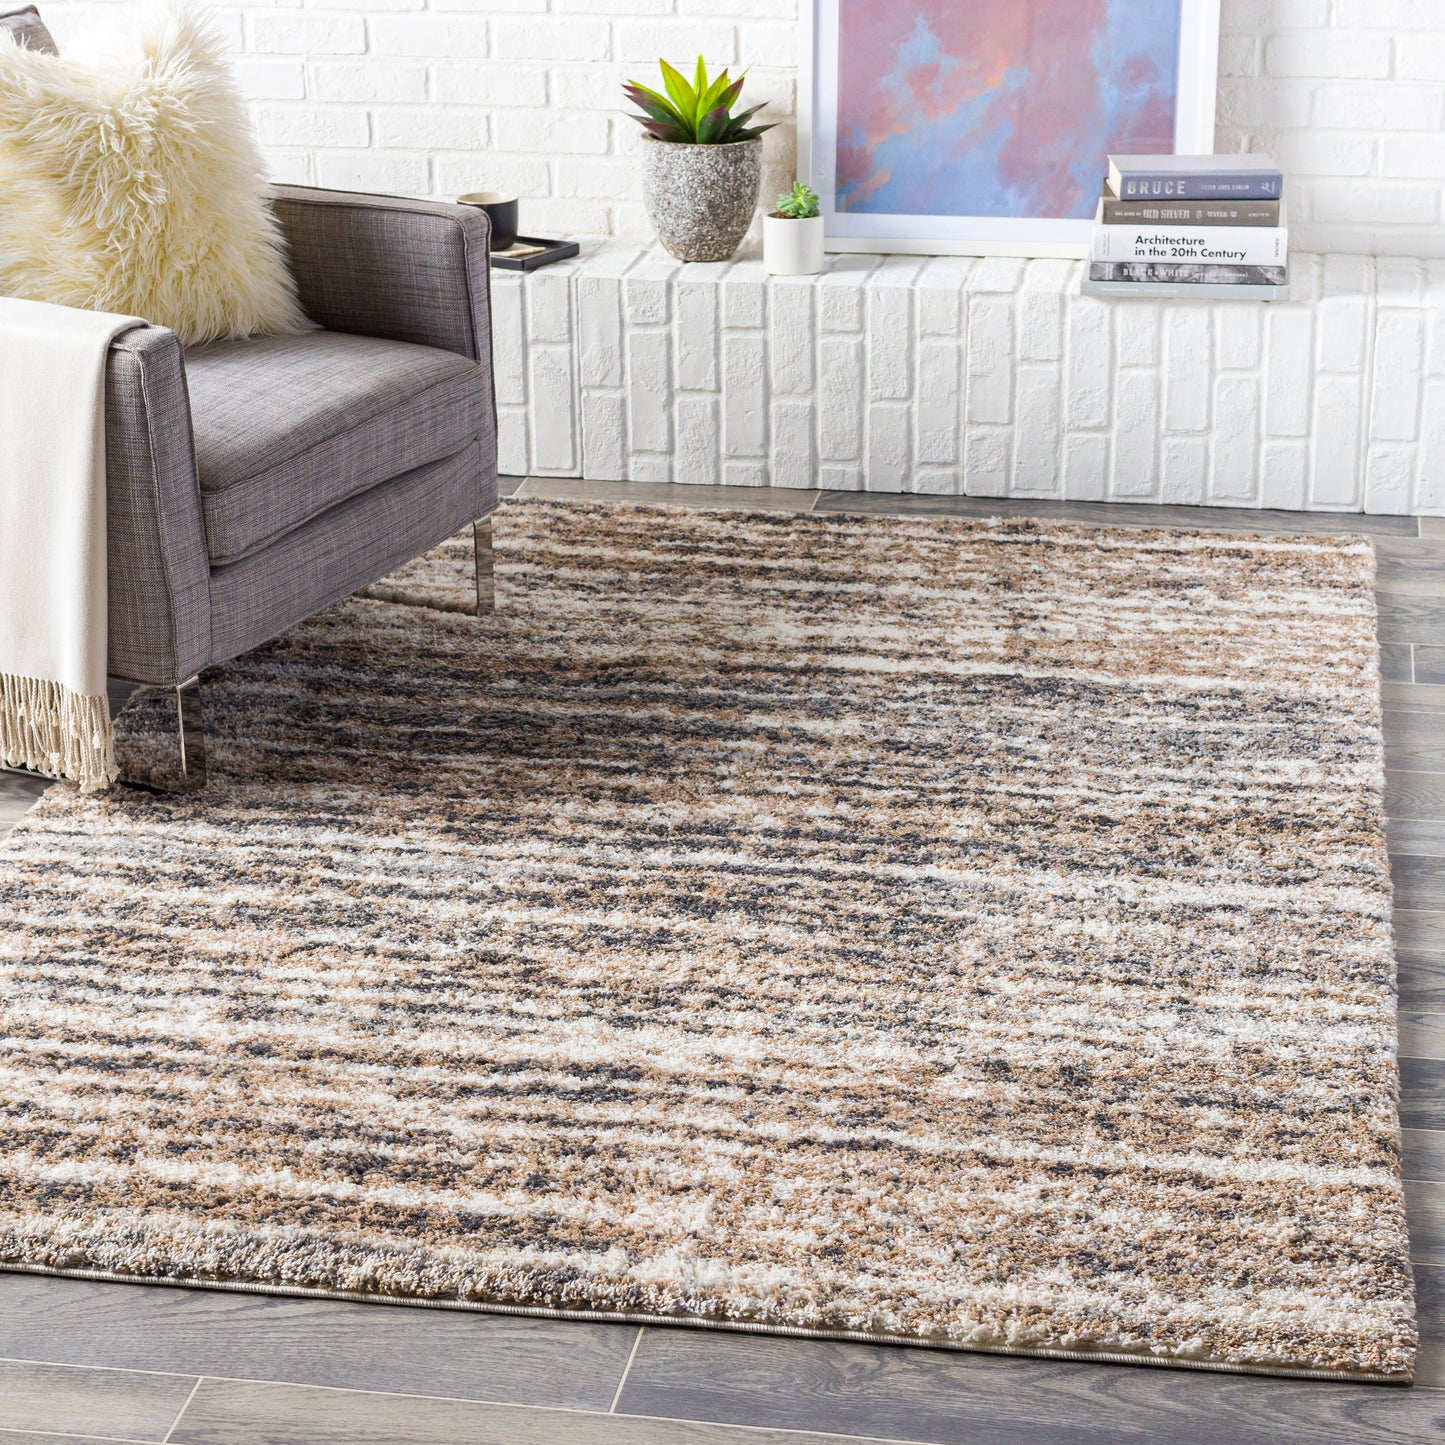 Aliyah shag 26302 Machine Woven Synthetic Blend Indoor Area Rug by Surya Rugs